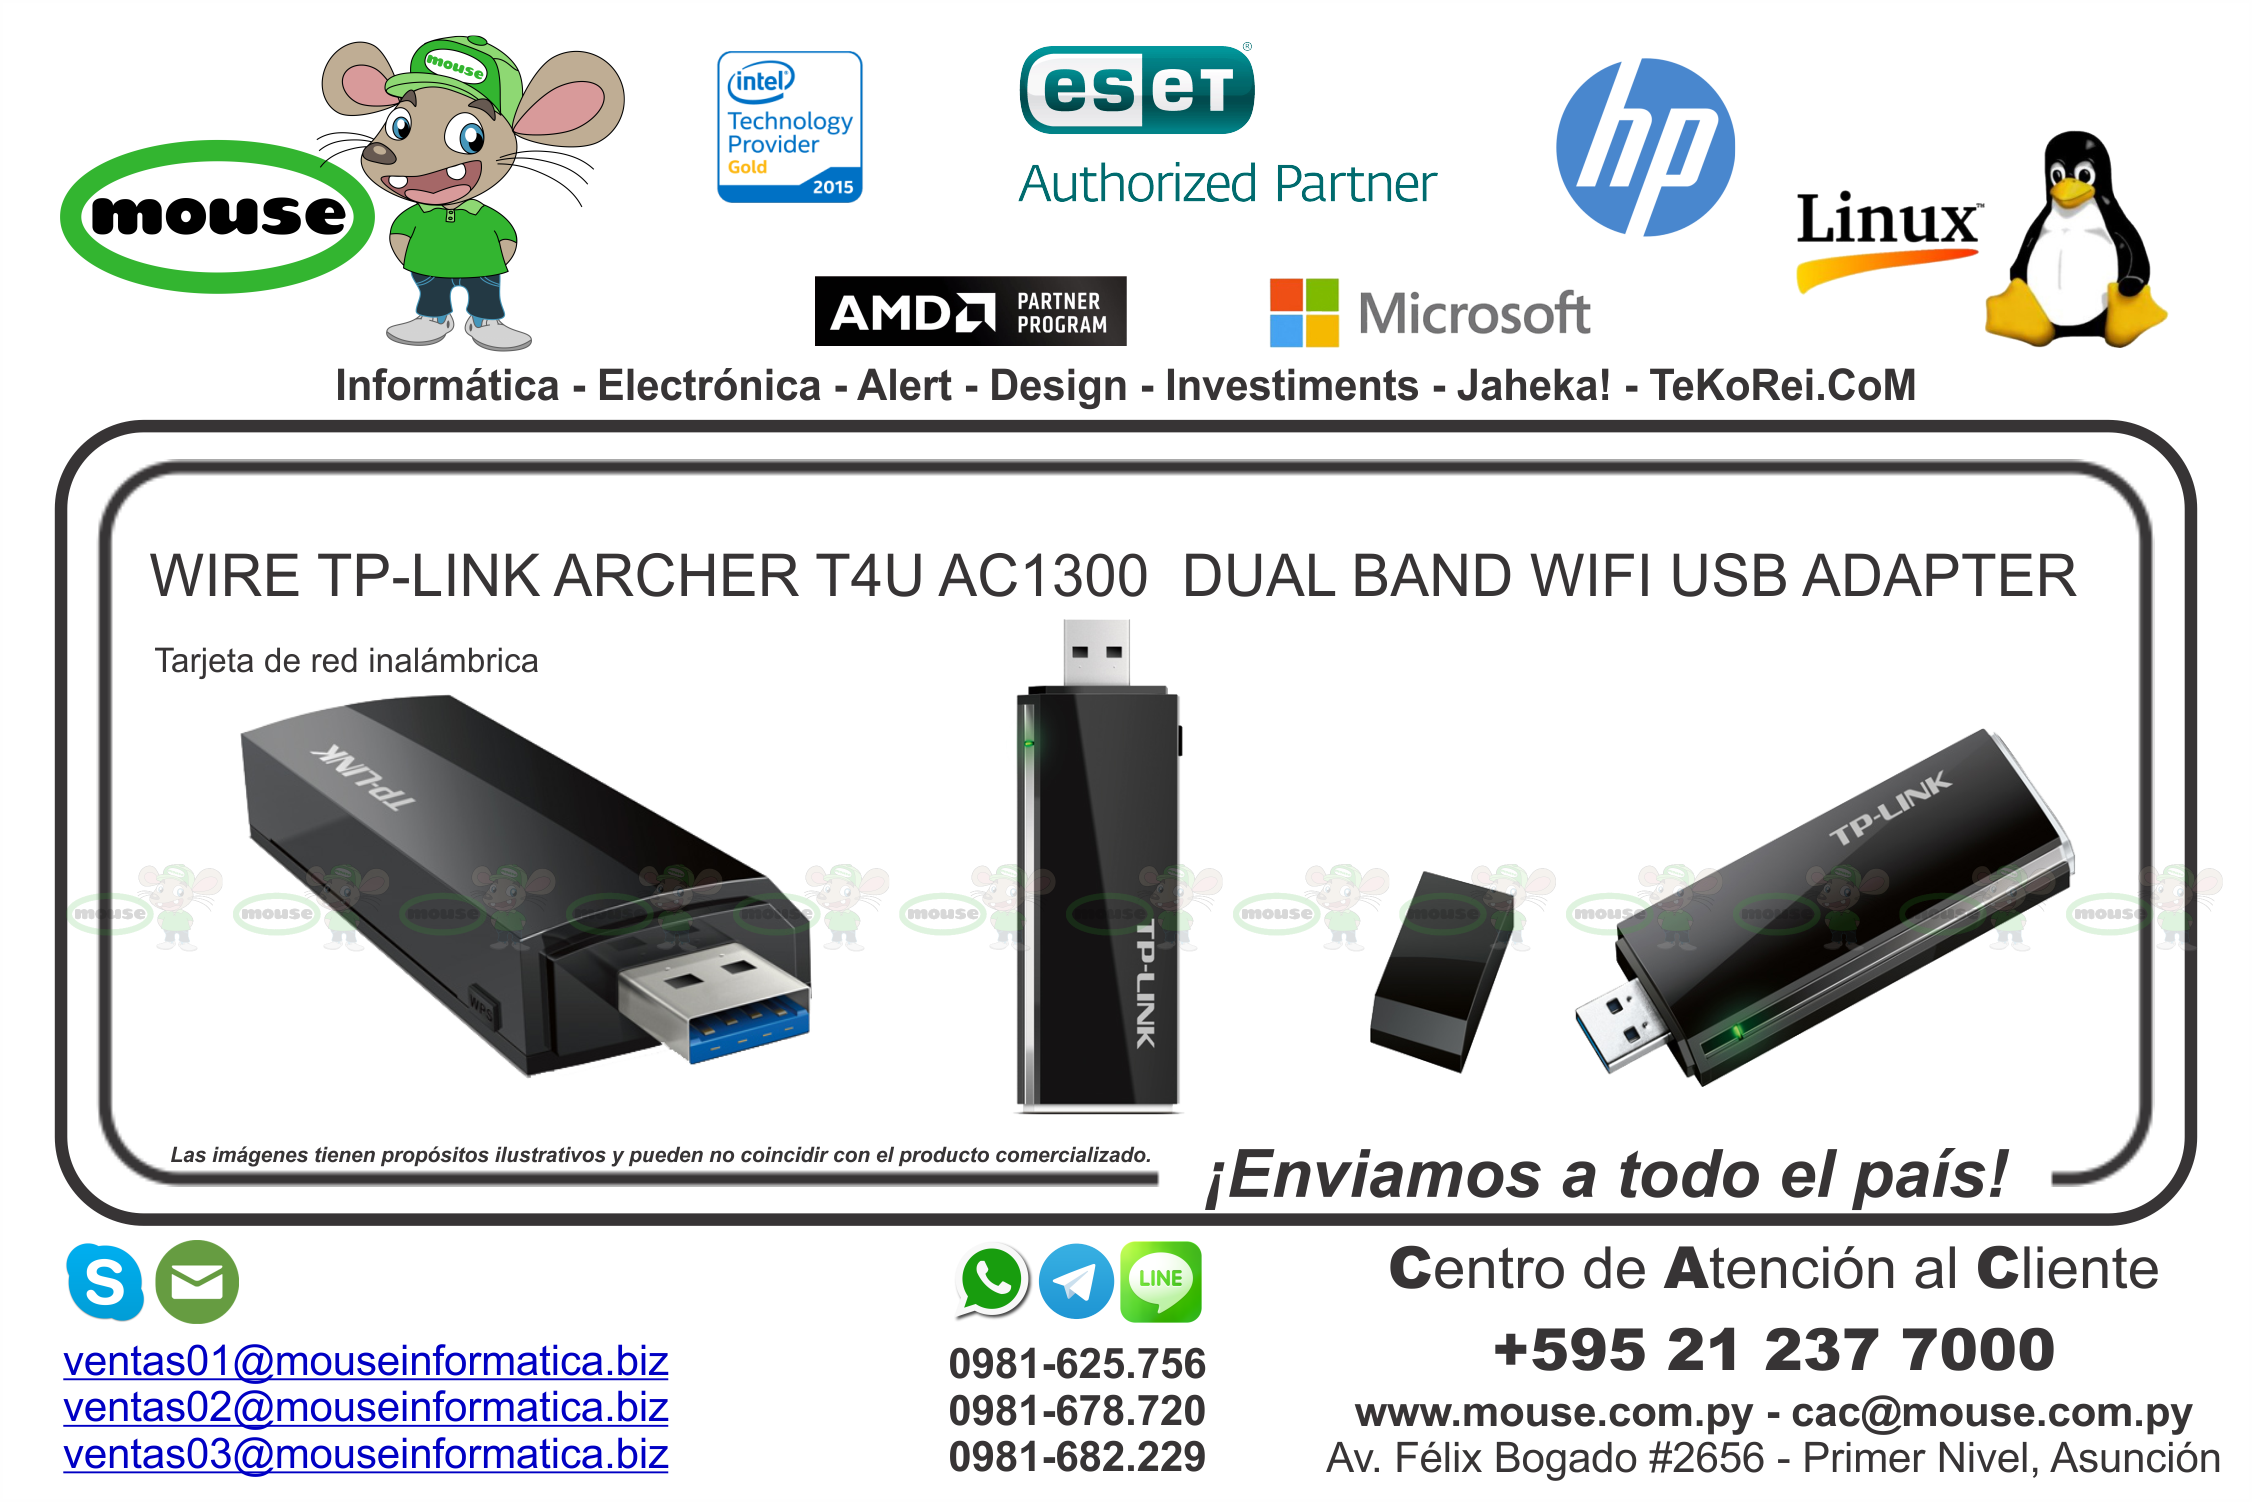 WIRE TPLINK ARCHER T4U AC1300 DUAL BAND WIFI USB ADAPTER MOUSE SHOP